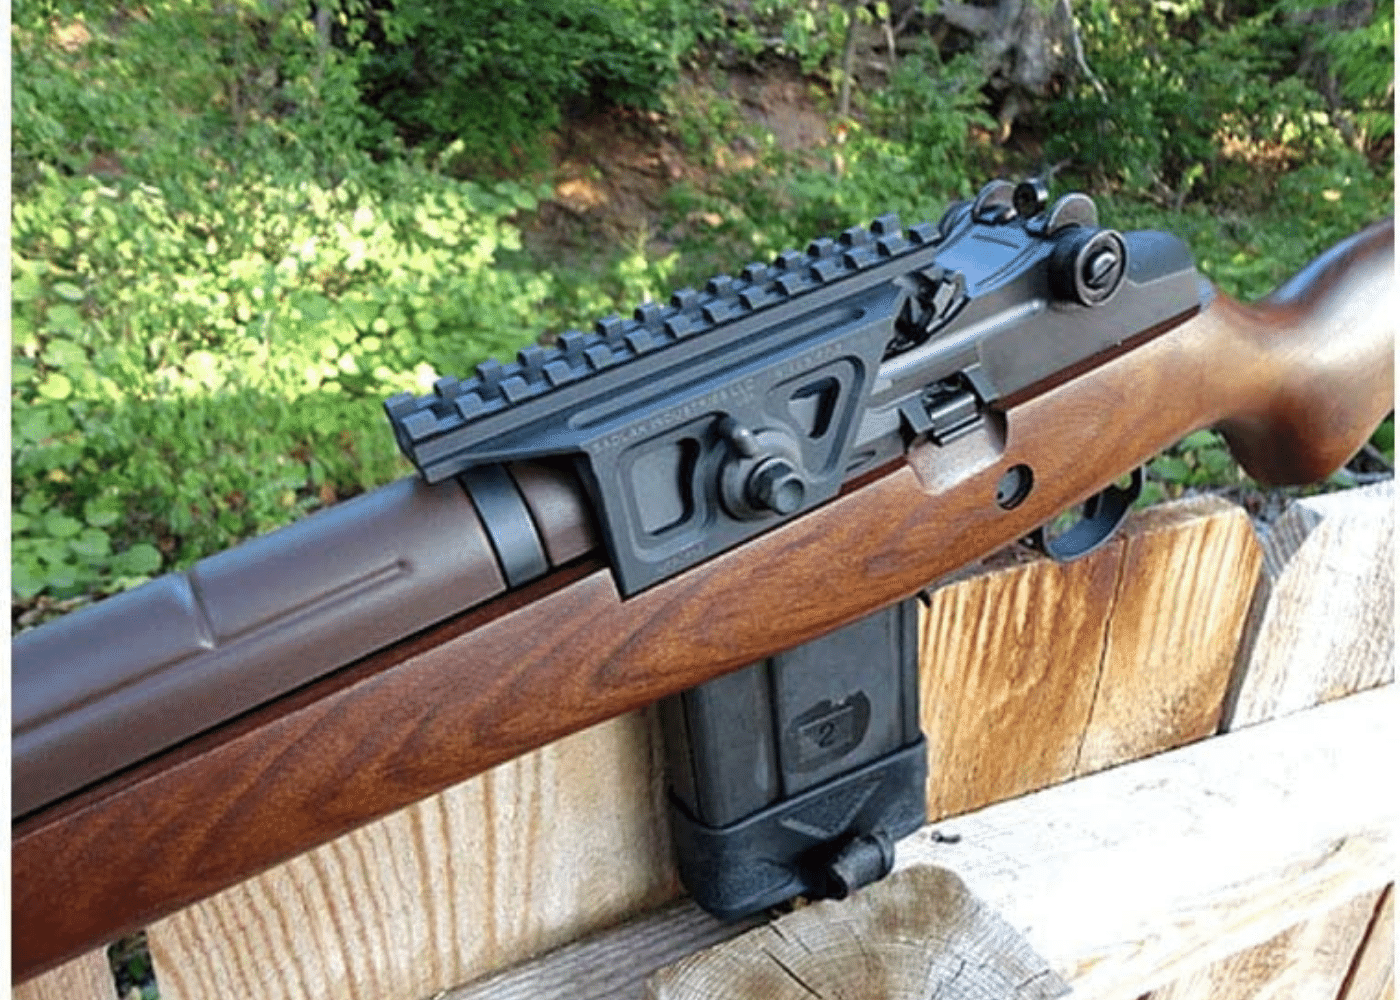 A M1A rifle with scope mount sitting on a wood fence with woods in the background